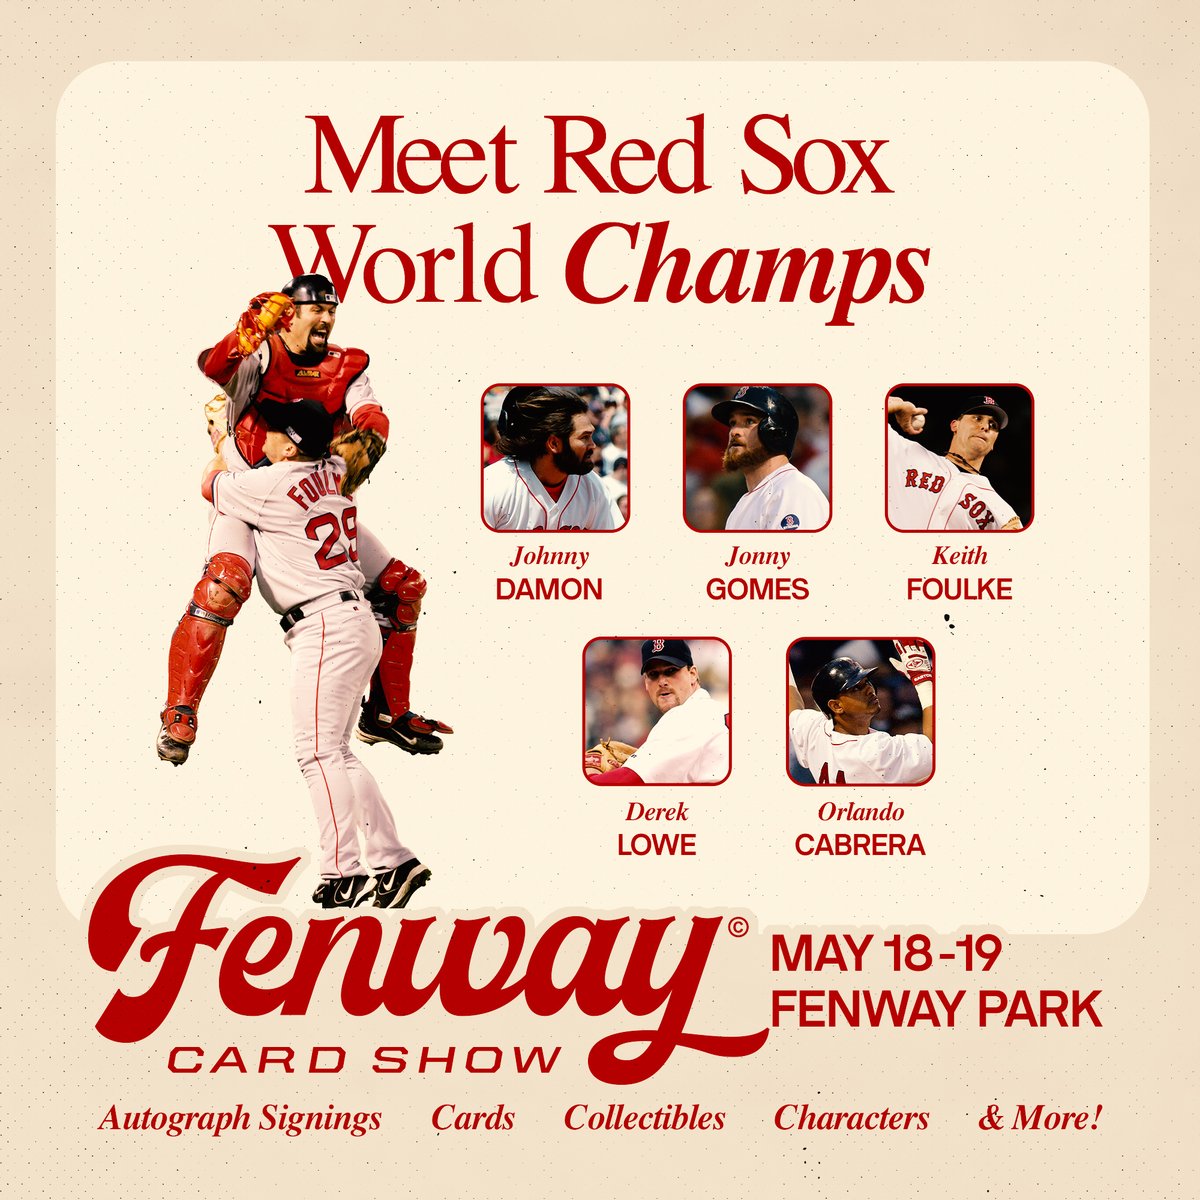 The Fenway Card Show is back this month! Be there: redsox.com/fenwaycardshow